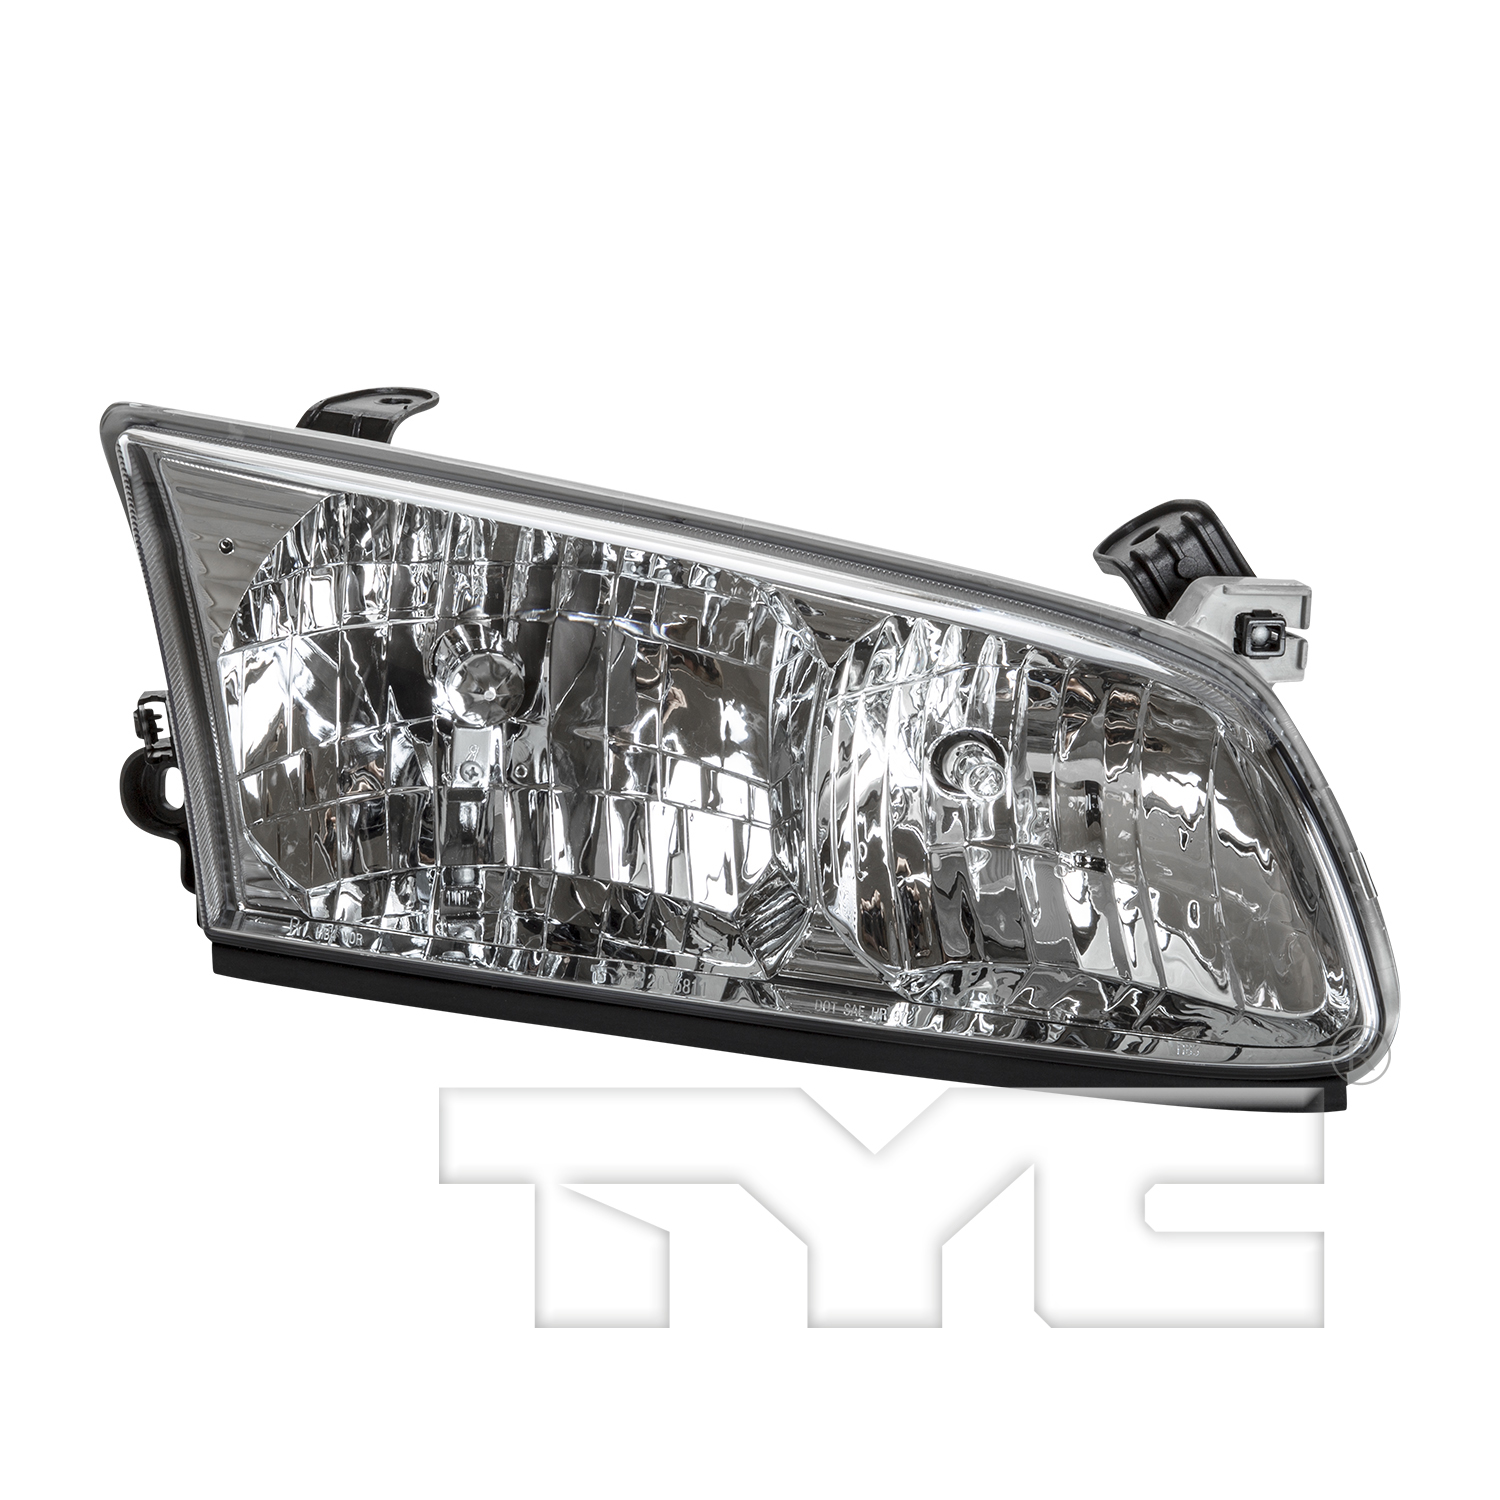 Aftermarket HEADLIGHTS for TOYOTA - CAMRY, CAMRY,00-01,RT Headlamp assy composite